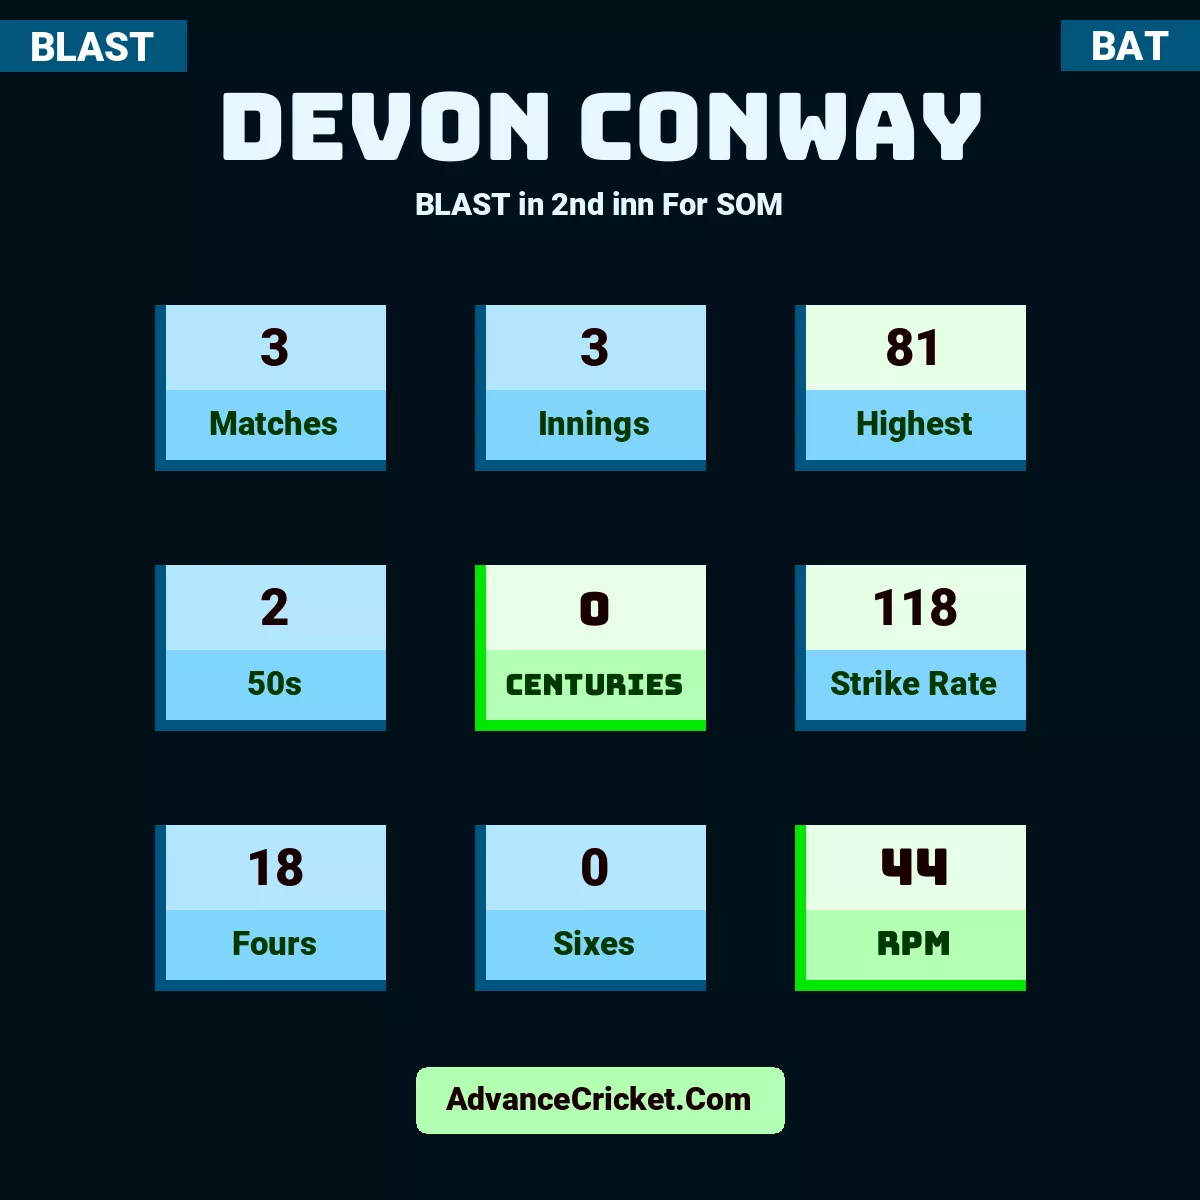 Devon Conway BLAST  in 2nd inn For SOM, Devon Conway played 3 matches, scored 81 runs as highest, 2 half-centuries, and 0 centuries, with a strike rate of 118. D.Conway hit 18 fours and 0 sixes, with an RPM of 44.